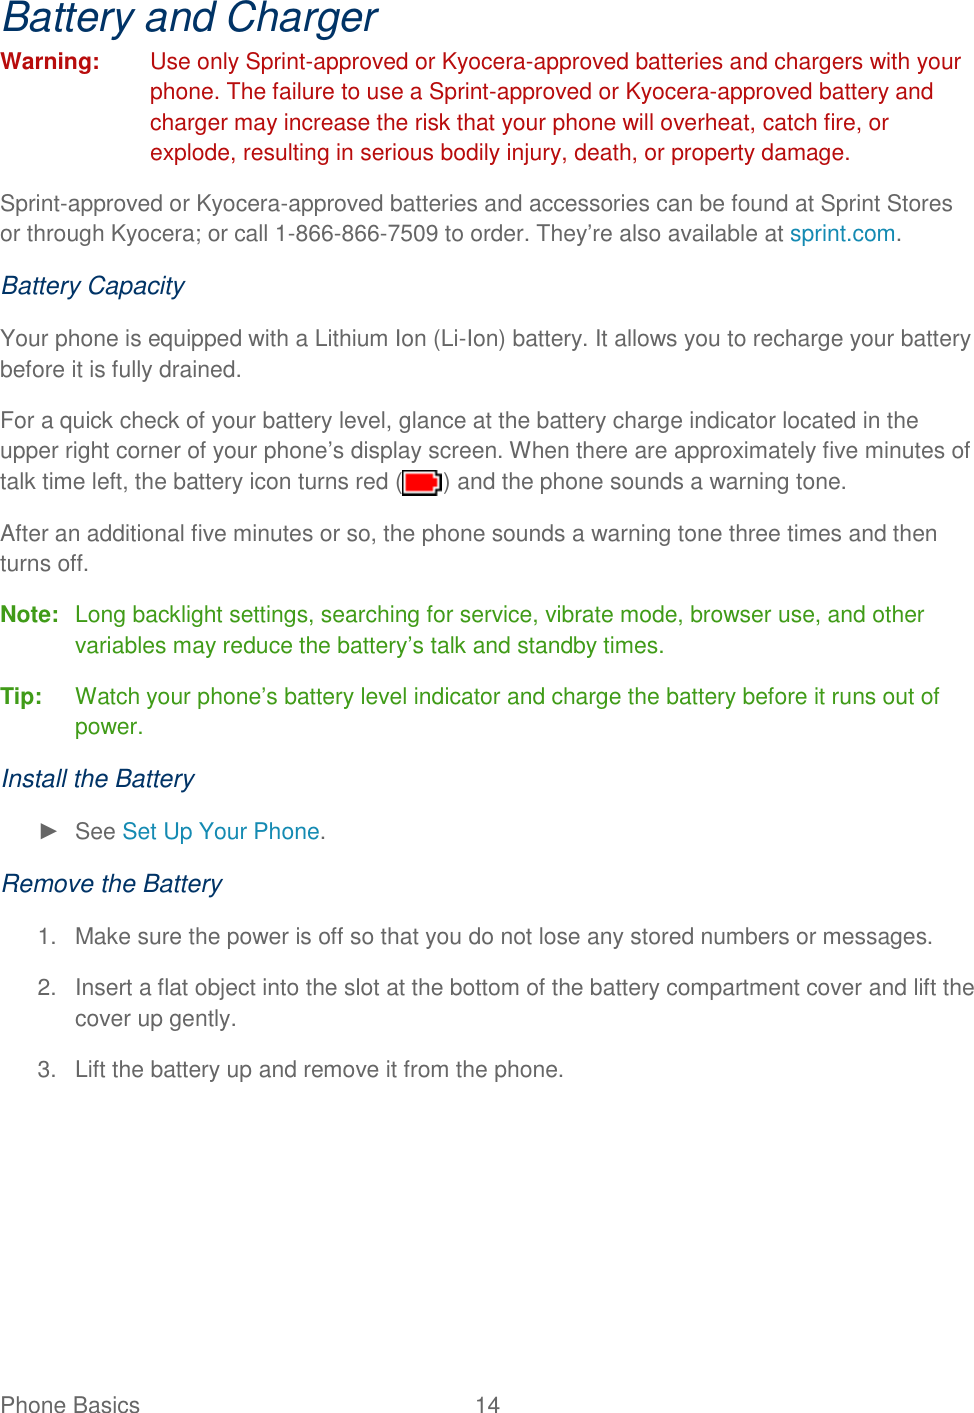 Phone Basics  14   Battery and Charger Warning:  Use only Sprint-approved or Kyocera-approved batteries and chargers with your phone. The failure to use a Sprint-approved or Kyocera-approved battery and charger may increase the risk that your phone will overheat, catch fire, or explode, resulting in serious bodily injury, death, or property damage. Sprint-approved or Kyocera-approved batteries and accessories can be found at Sprint Stores or through Kyocera; or call 1-866-866-7509 to order. They’re also available at sprint.com. Battery Capacity Your phone is equipped with a Lithium Ion (Li-Ion) battery. It allows you to recharge your battery before it is fully drained. For a quick check of your battery level, glance at the battery charge indicator located in the upper right corner of your phone’s display screen. When there are approximately five minutes of talk time left, the battery icon turns red ( ) and the phone sounds a warning tone. After an additional five minutes or so, the phone sounds a warning tone three times and then turns off. Note:  Long backlight settings, searching for service, vibrate mode, browser use, and other variables may reduce the battery’s talk and standby times. Tip:  Watch your phone’s battery level indicator and charge the battery before it runs out of power. Install the Battery ►  See Set Up Your Phone. Remove the Battery 1.  Make sure the power is off so that you do not lose any stored numbers or messages. 2.  Insert a flat object into the slot at the bottom of the battery compartment cover and lift the cover up gently. 3.  Lift the battery up and remove it from the phone. 